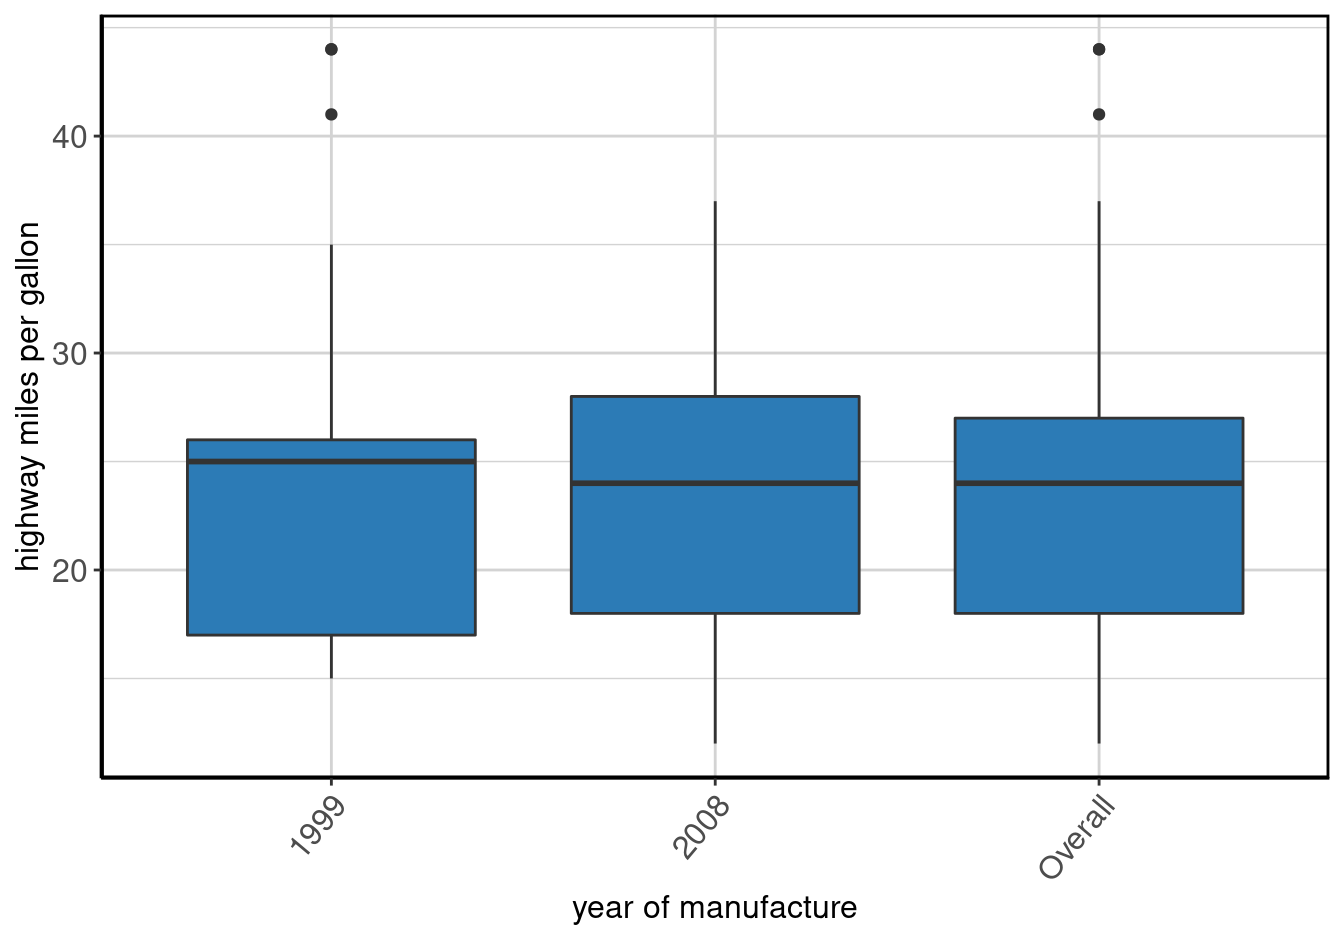 Boxplot of <b>highway miles per gallon</b> by <b>year of manufacture</b>.